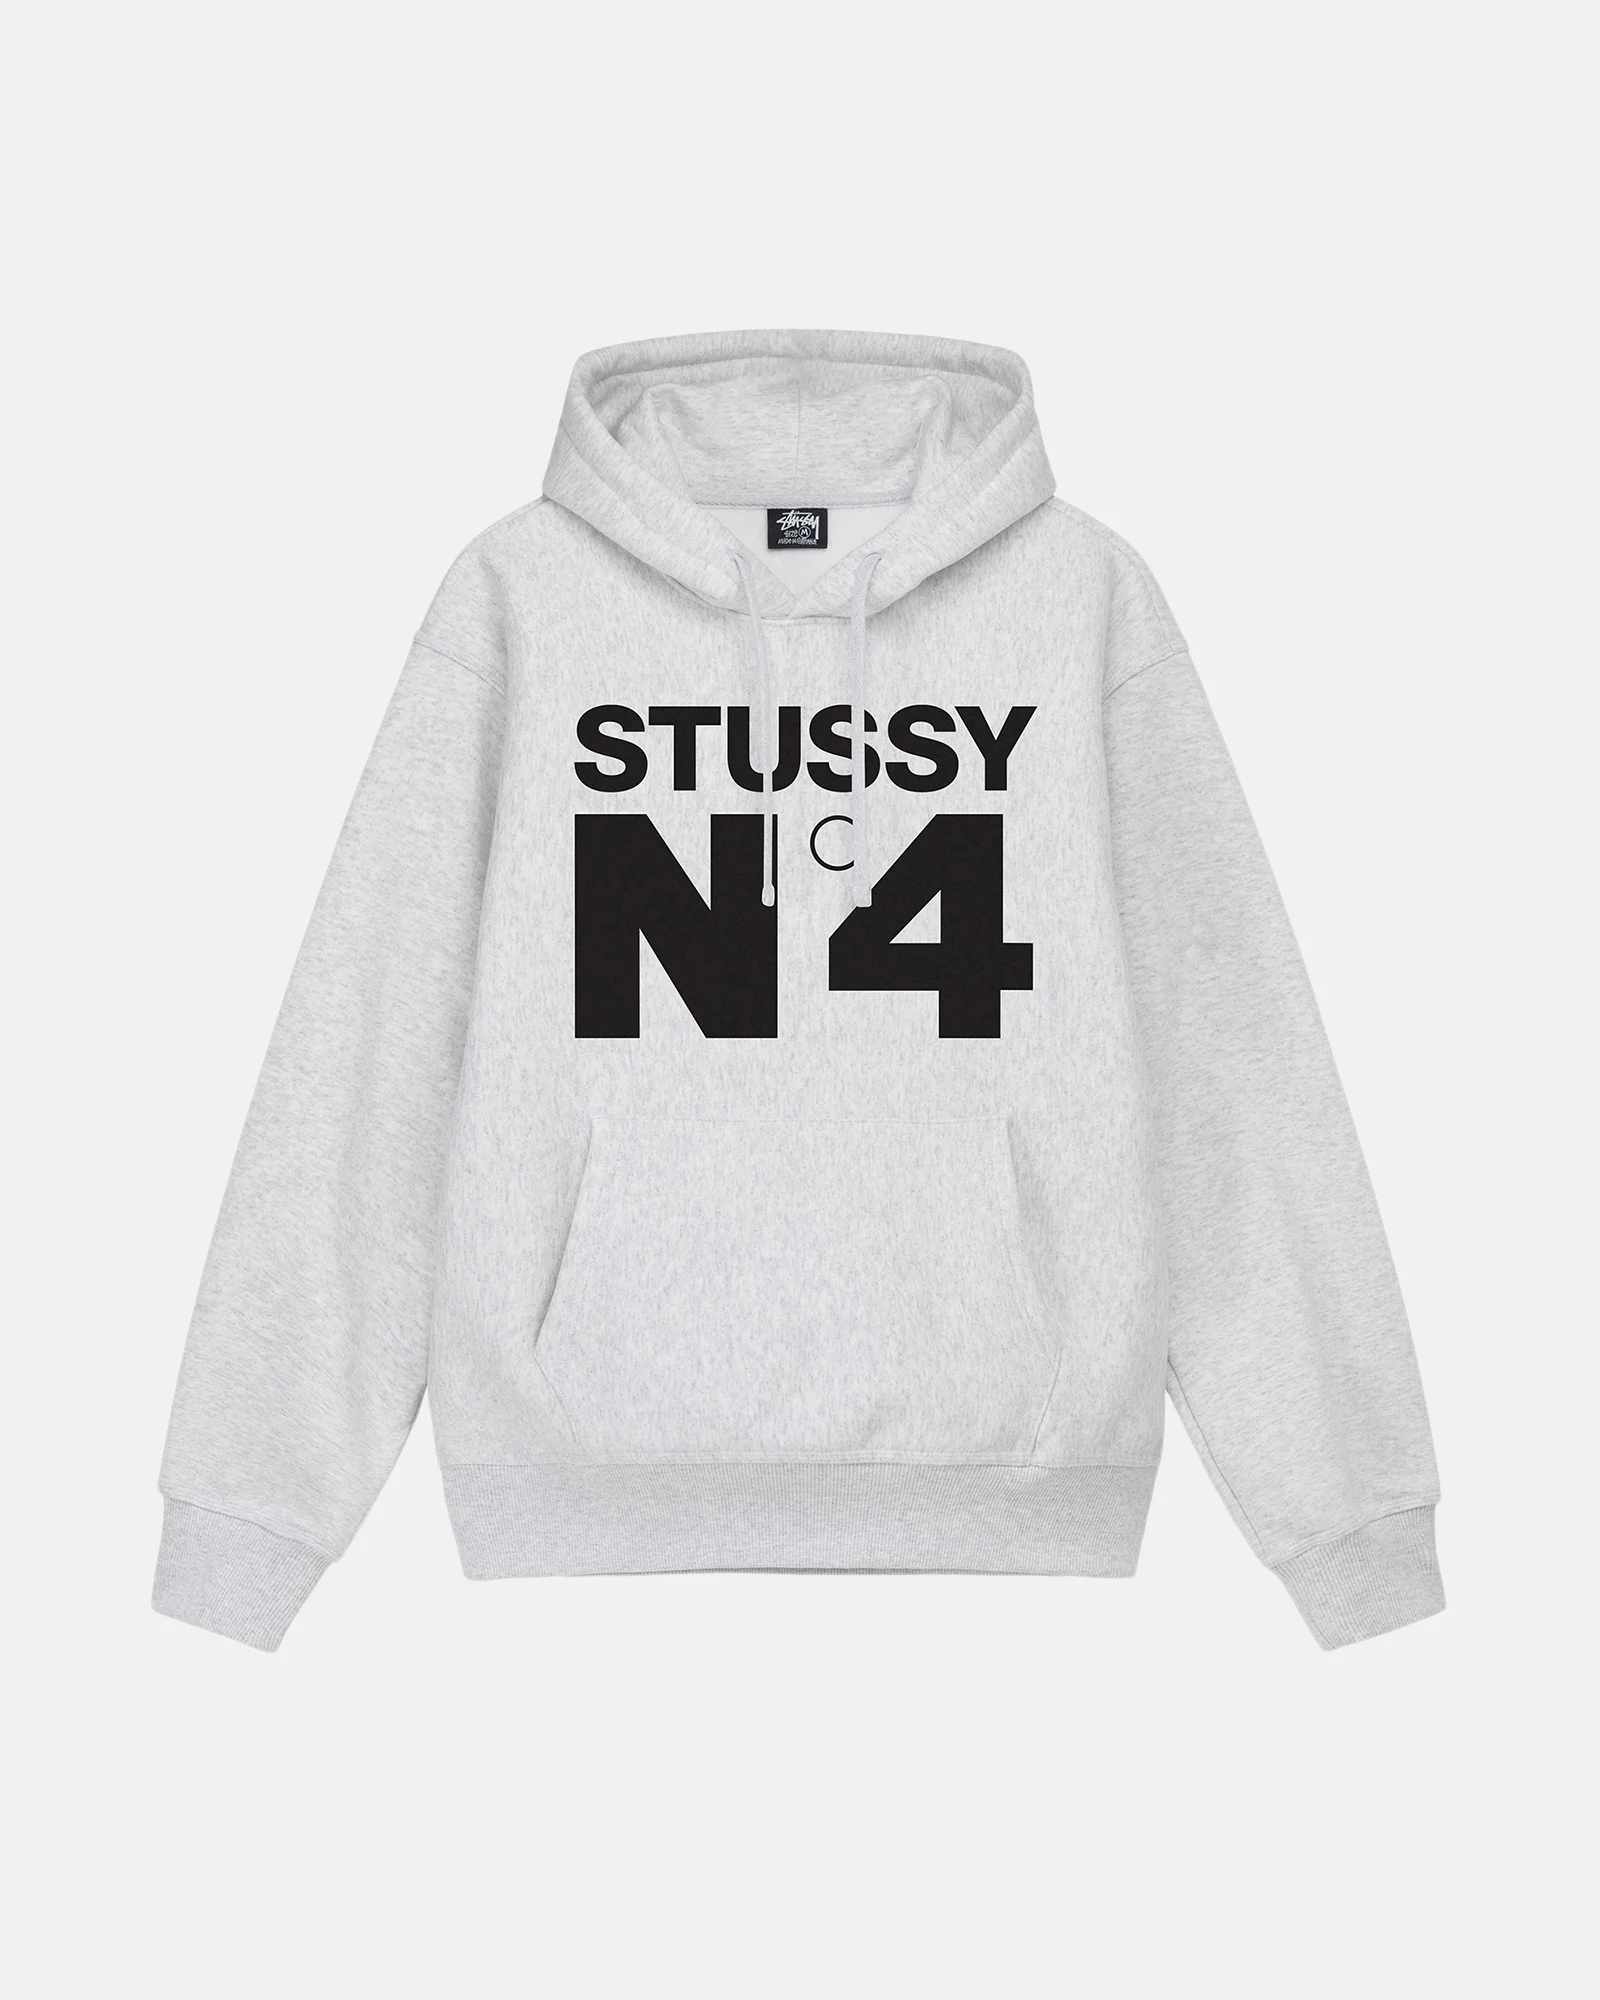 The Iconic Stussy Hoodie: A Streetwear Staple